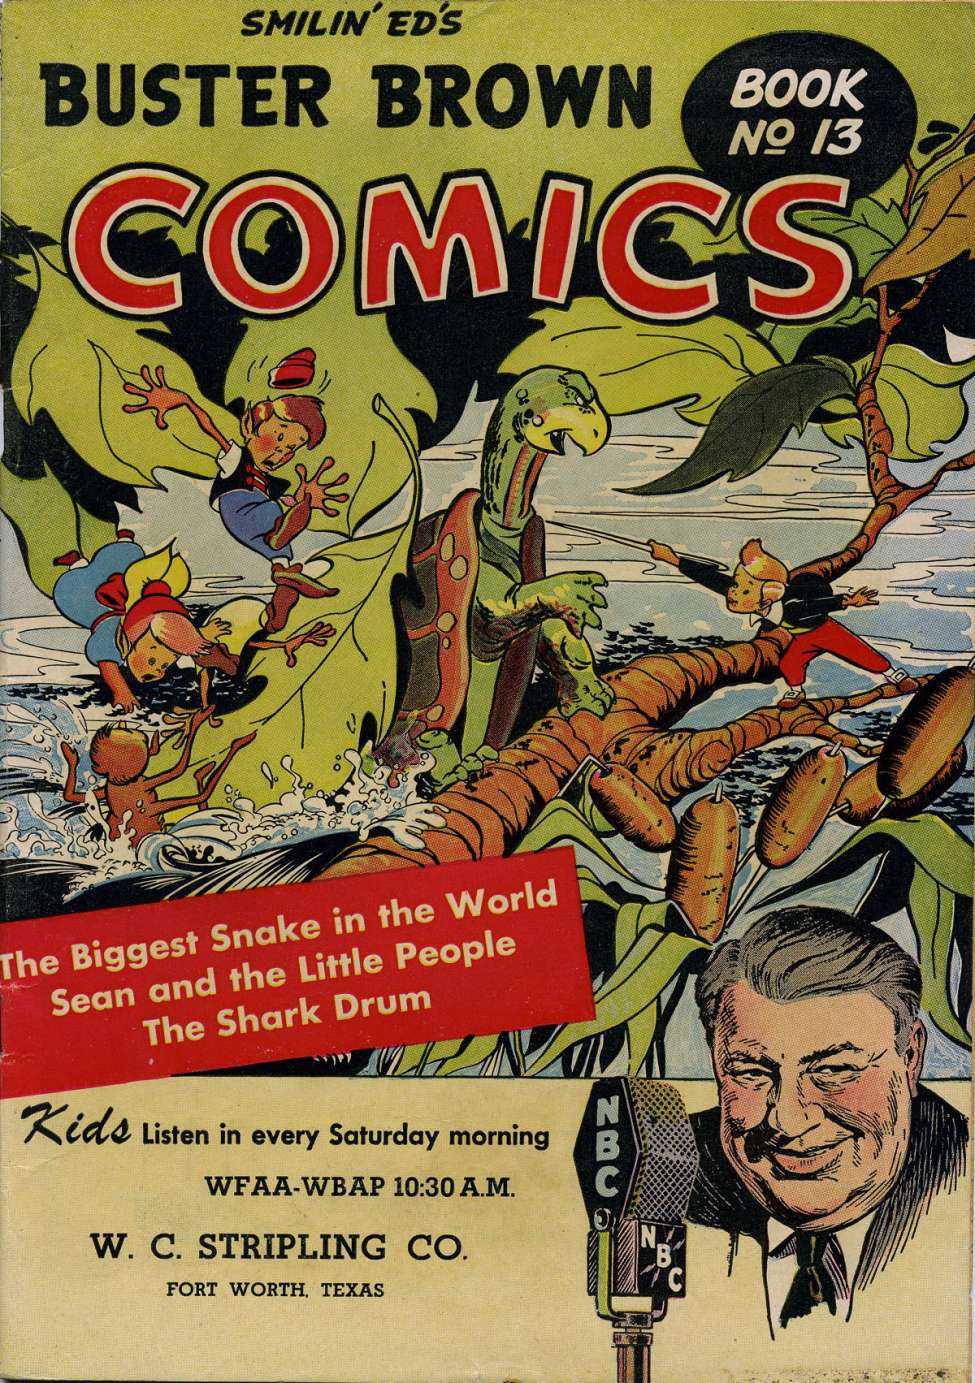 Comic Book Cover For Buster Brown 13